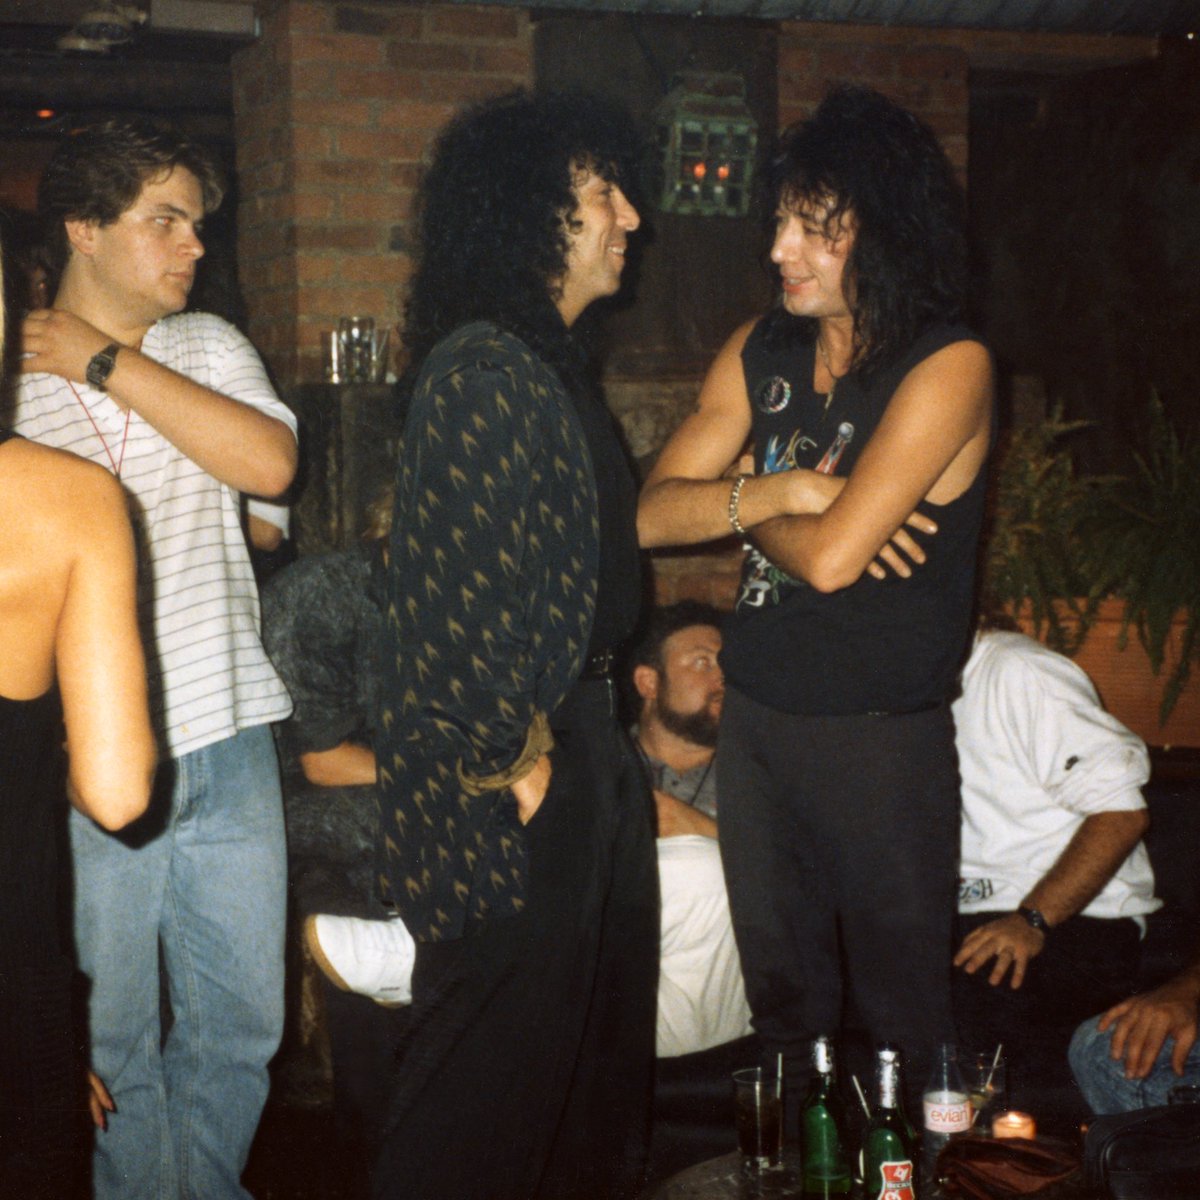 Wow! Never saw this photo before now. It was sent to me by Dave Snowden and taken by Lydia Criss. That’s a 23 year old me looking on as @ace_frehley & @PaulStanleyLive chat. I believe this was after Paul & Gene jammed with Ace at Limelight NYC. I was working with Ace at the time.